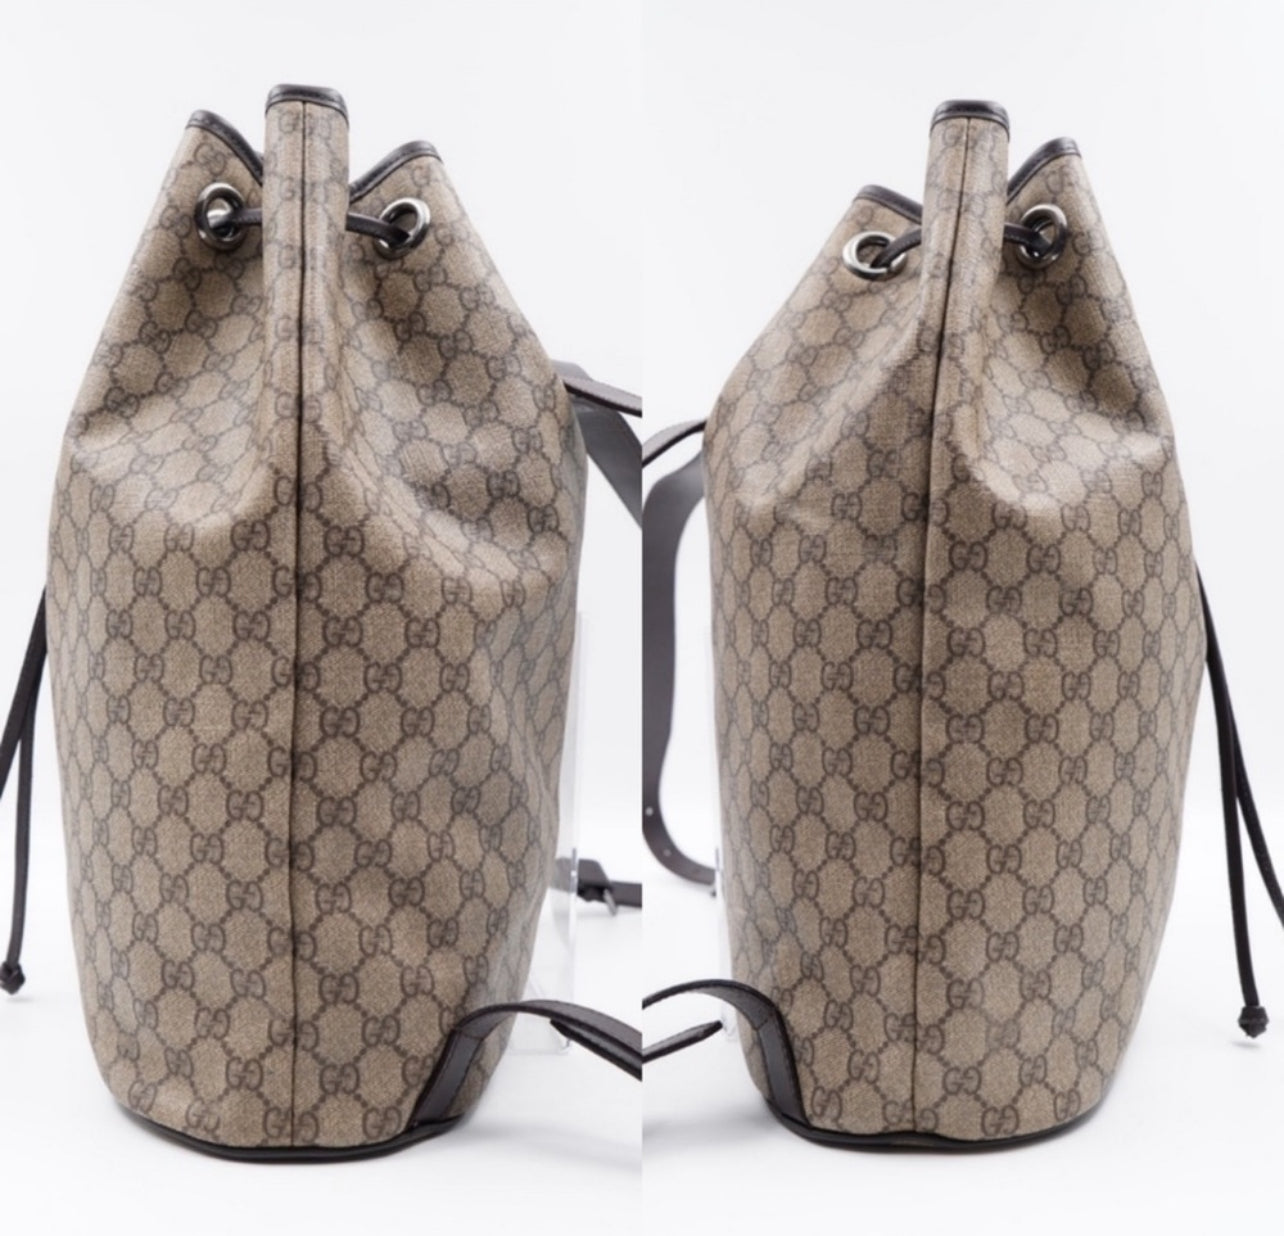 Pre-Loved GUCCI GG Canvas Drawstring Backpack with Silver-Tone Hardware and Leather Trim